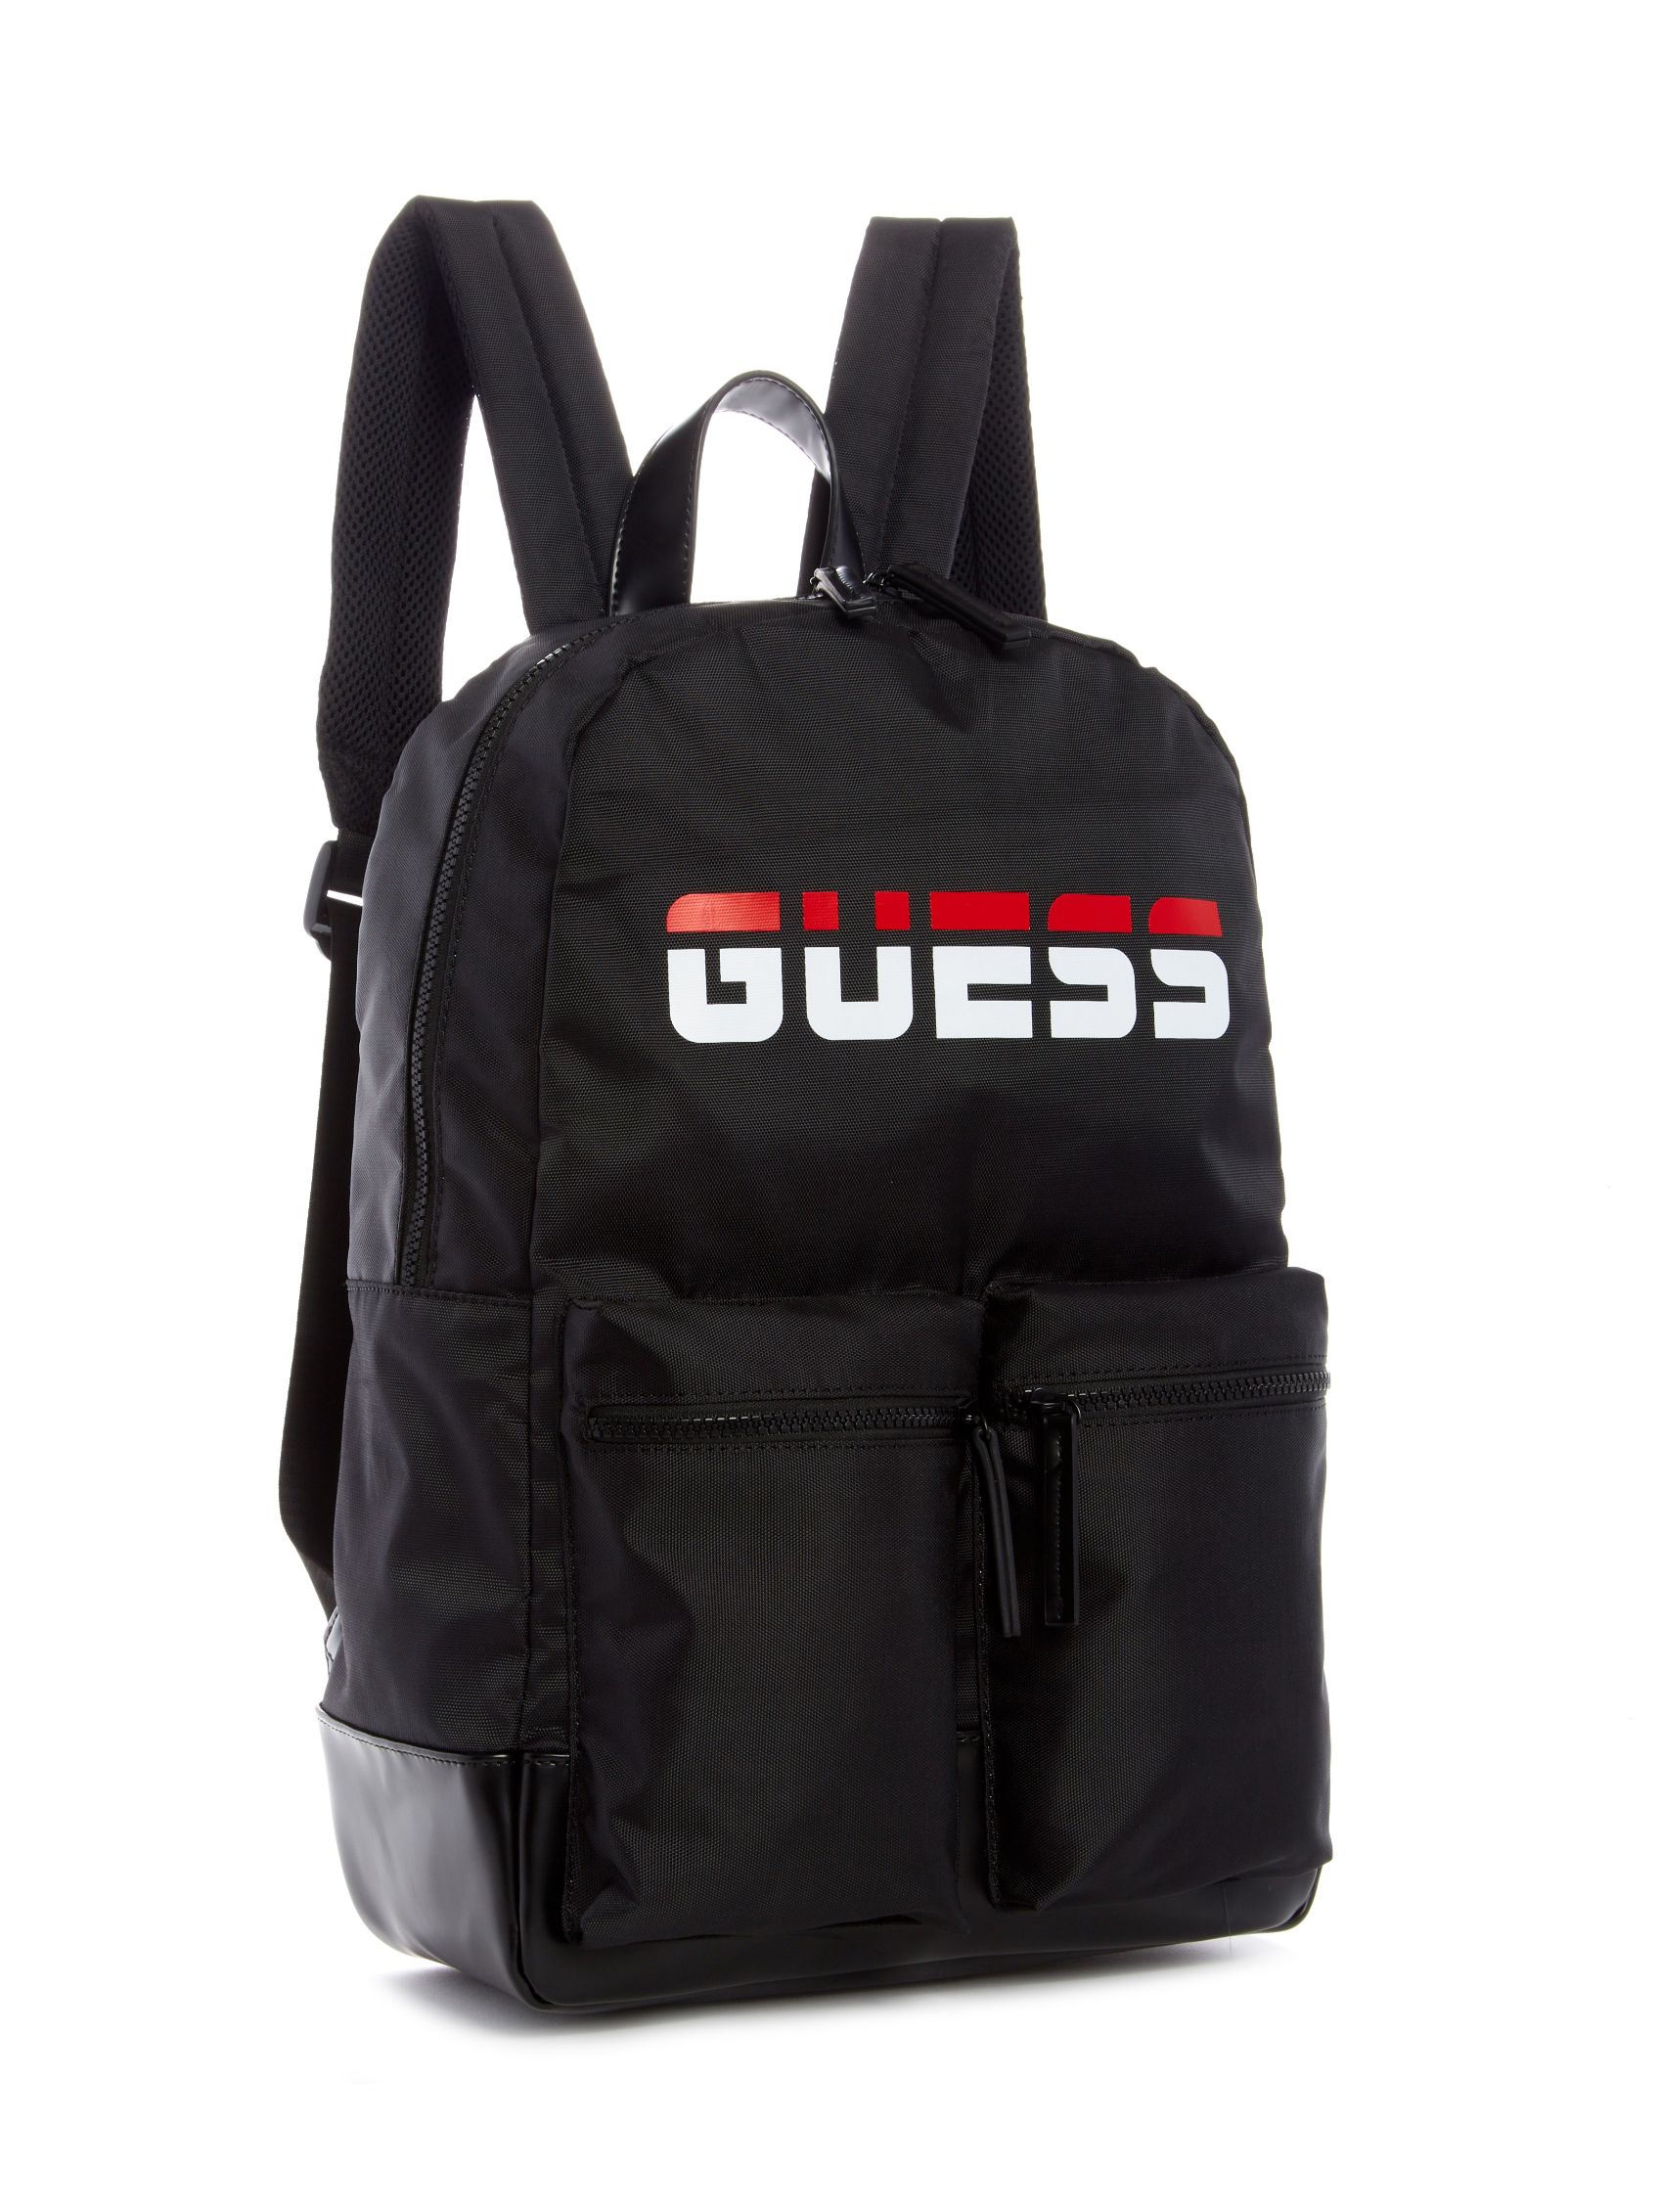 DUO BACKPACK | Guess Philippines